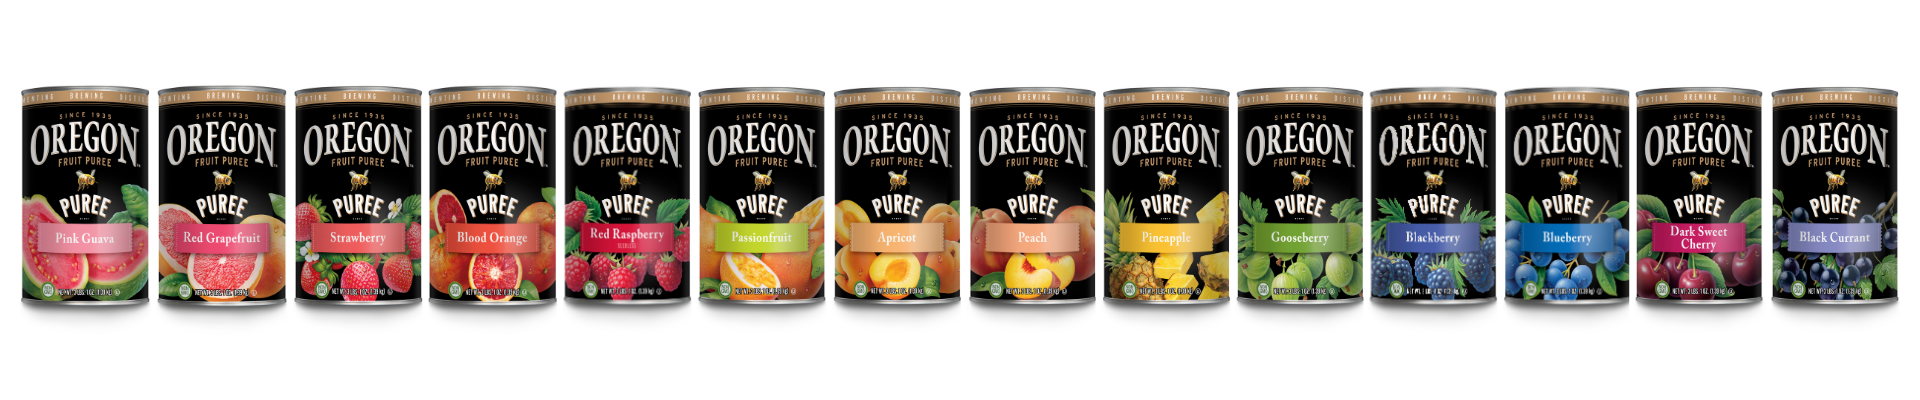 Assorted cans of oregon fruit puree